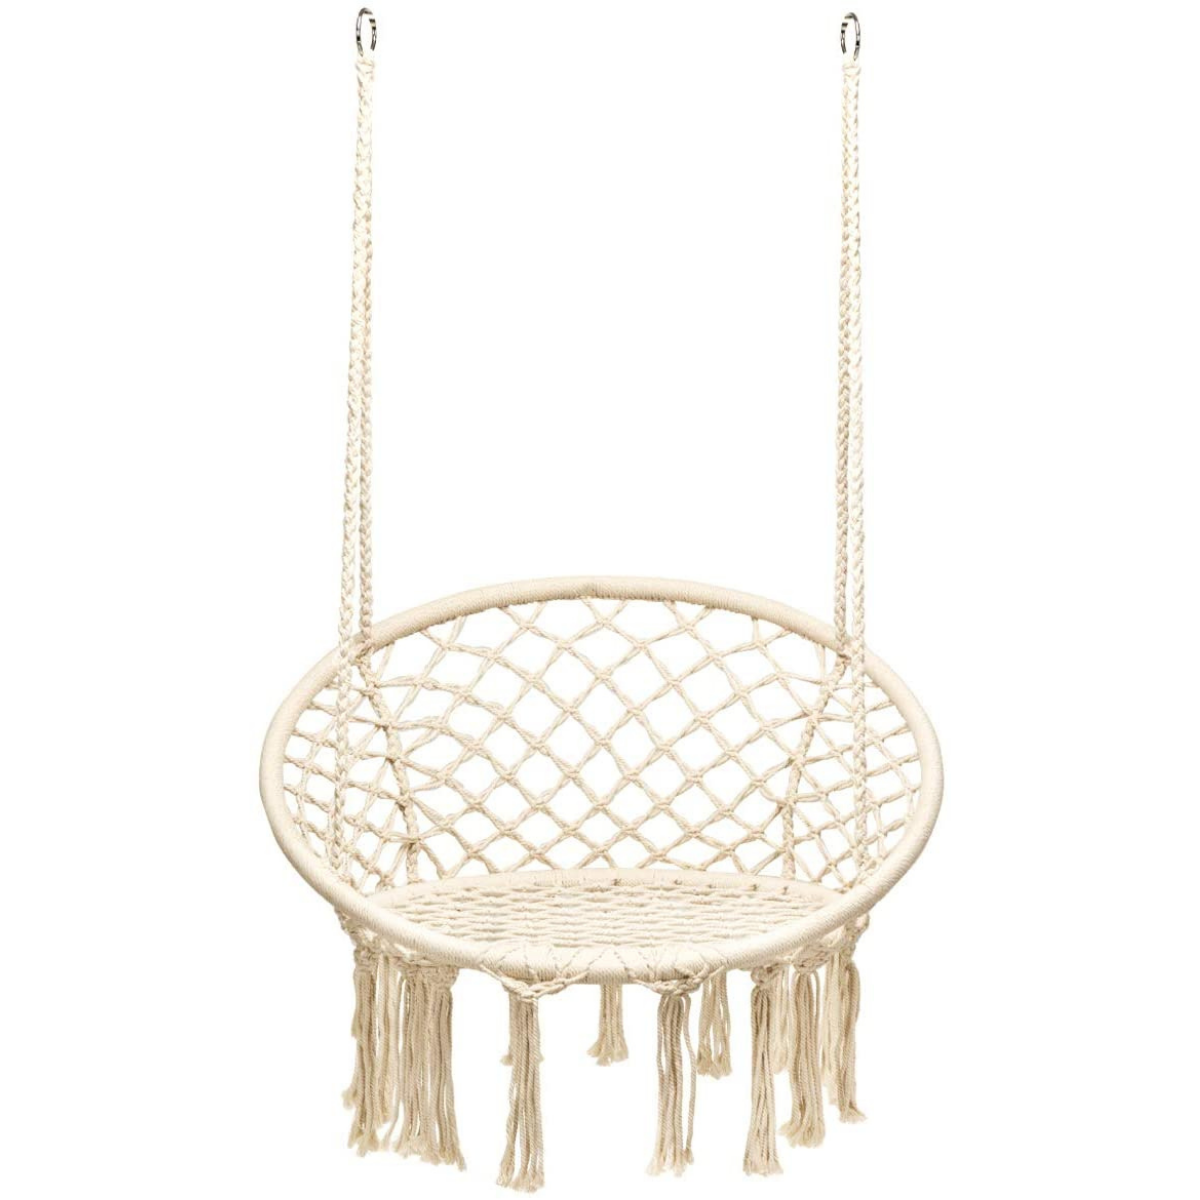 Hammock Swing Chair with Metal Rings (Stand not Included) White